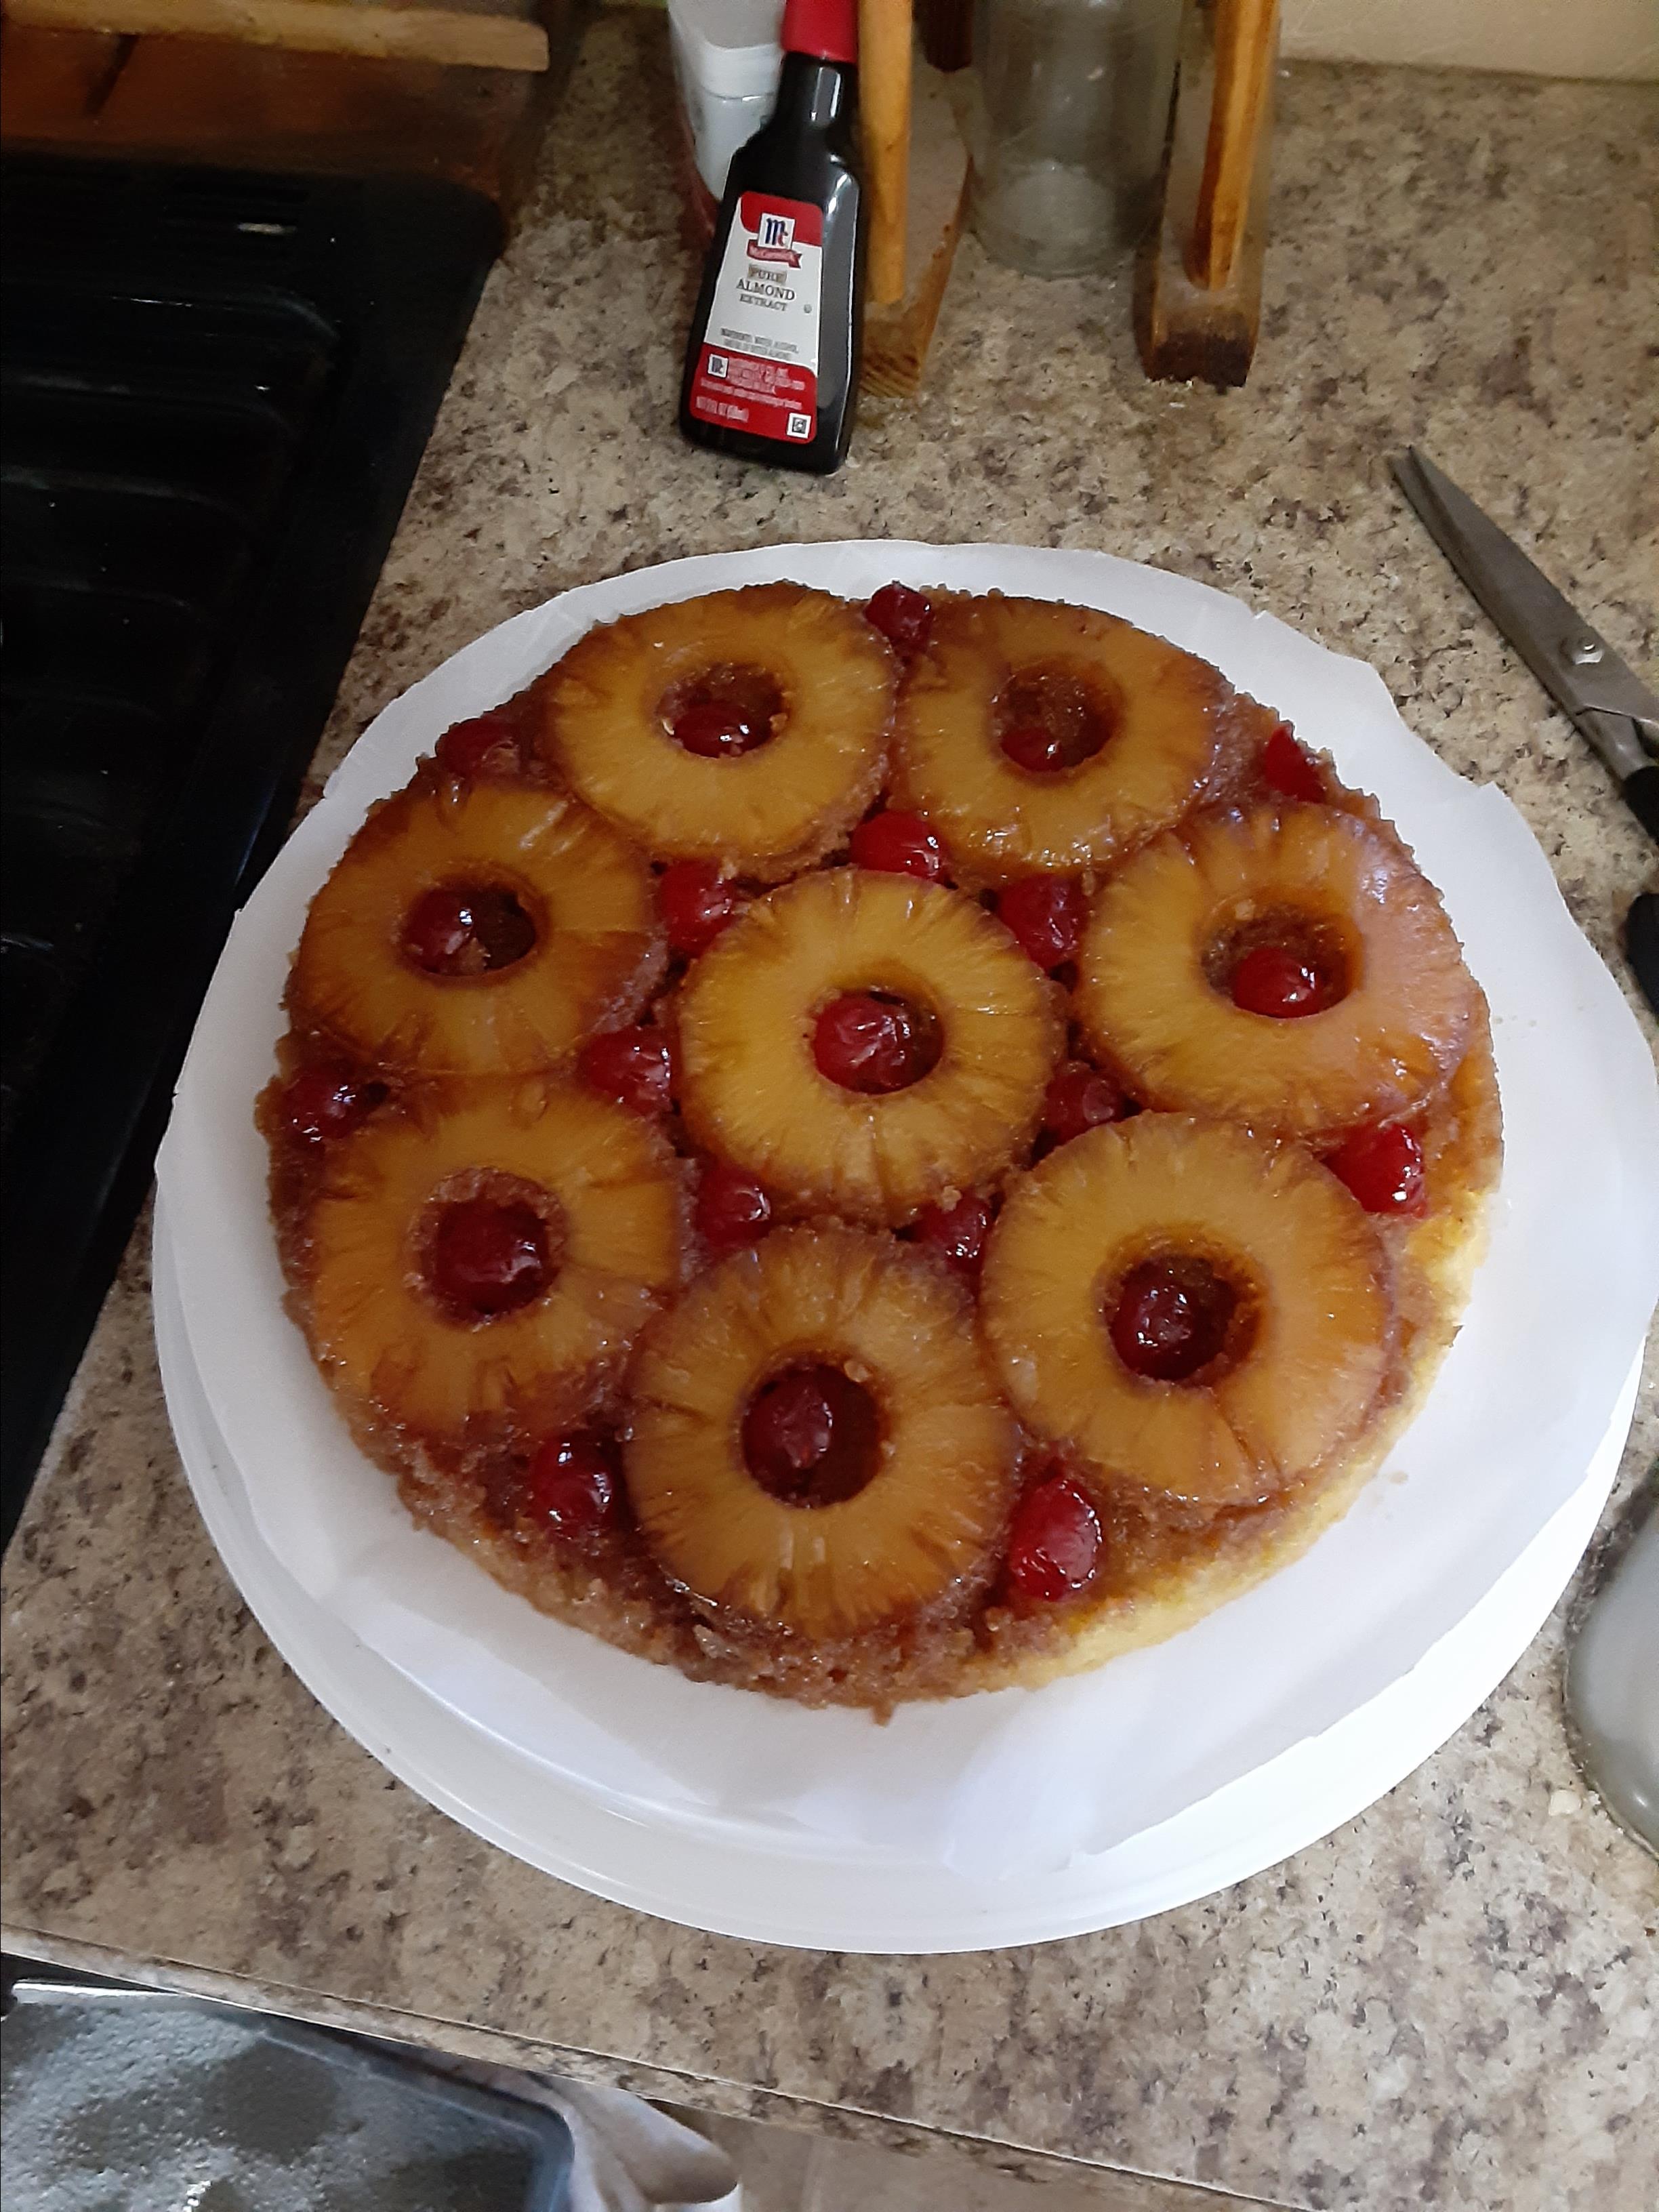 Old Fashioned Pineapple Upside-Down Cake 